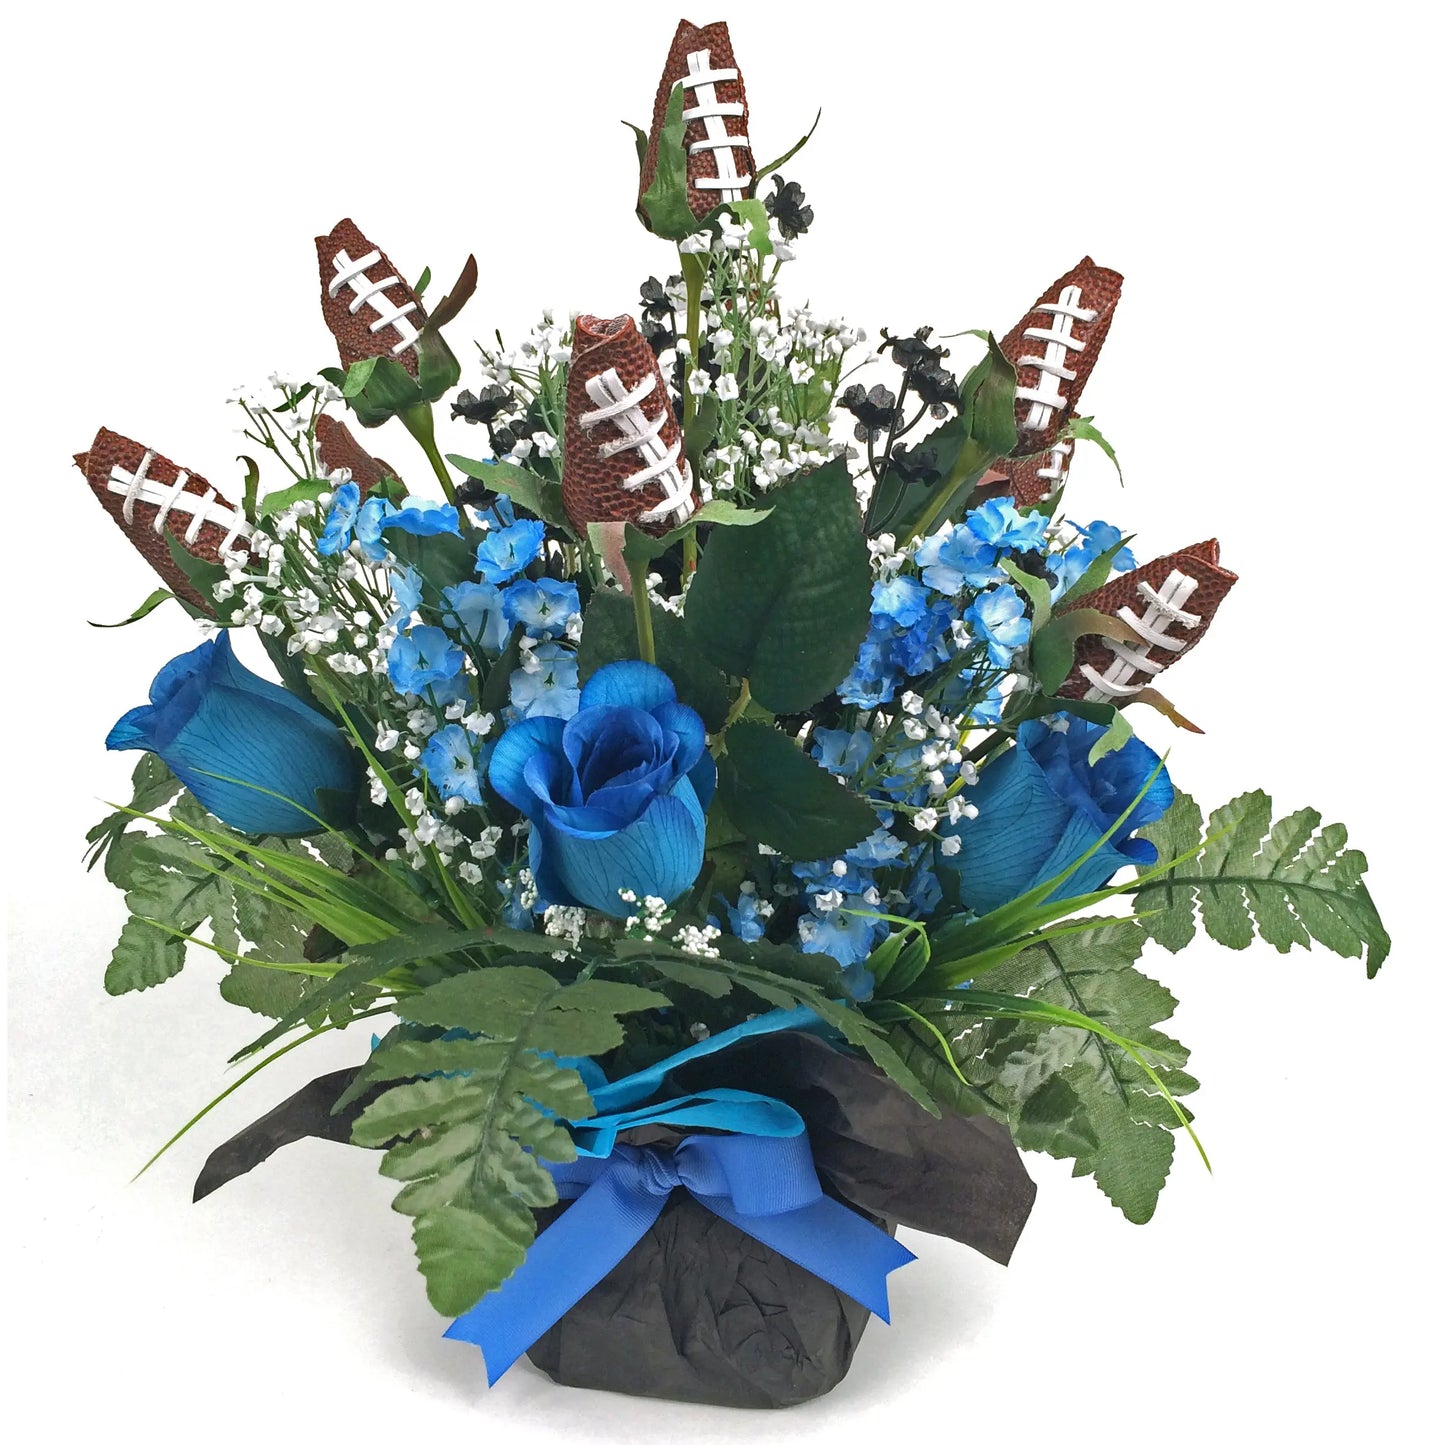 Football Rose Centerpiece Arrangement - Customize Color Theme for School or Team Sports Roses  